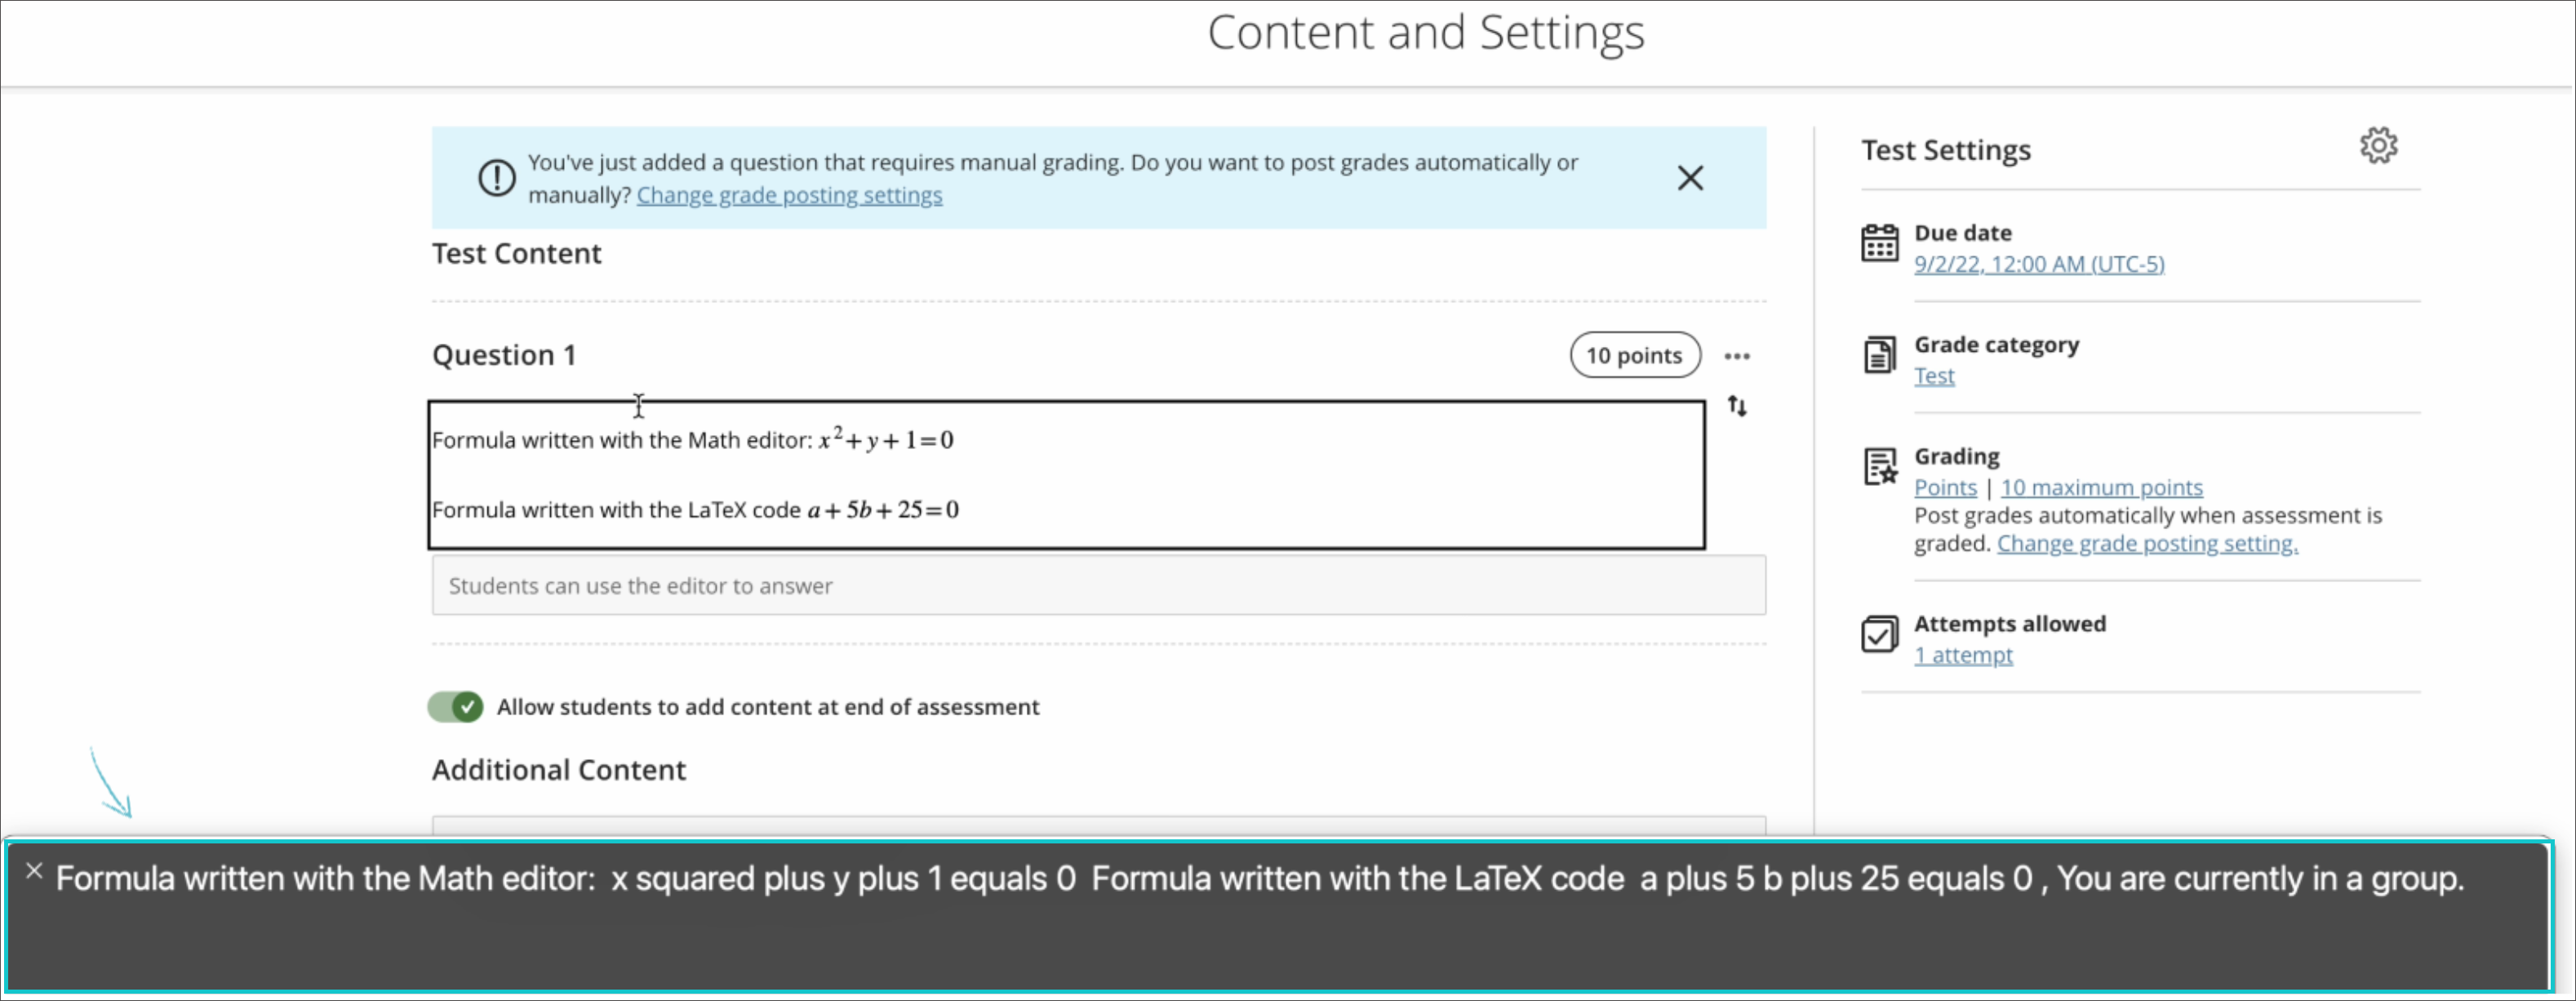 Math formulas added with the math editor and LaTeX equations read with screen readers